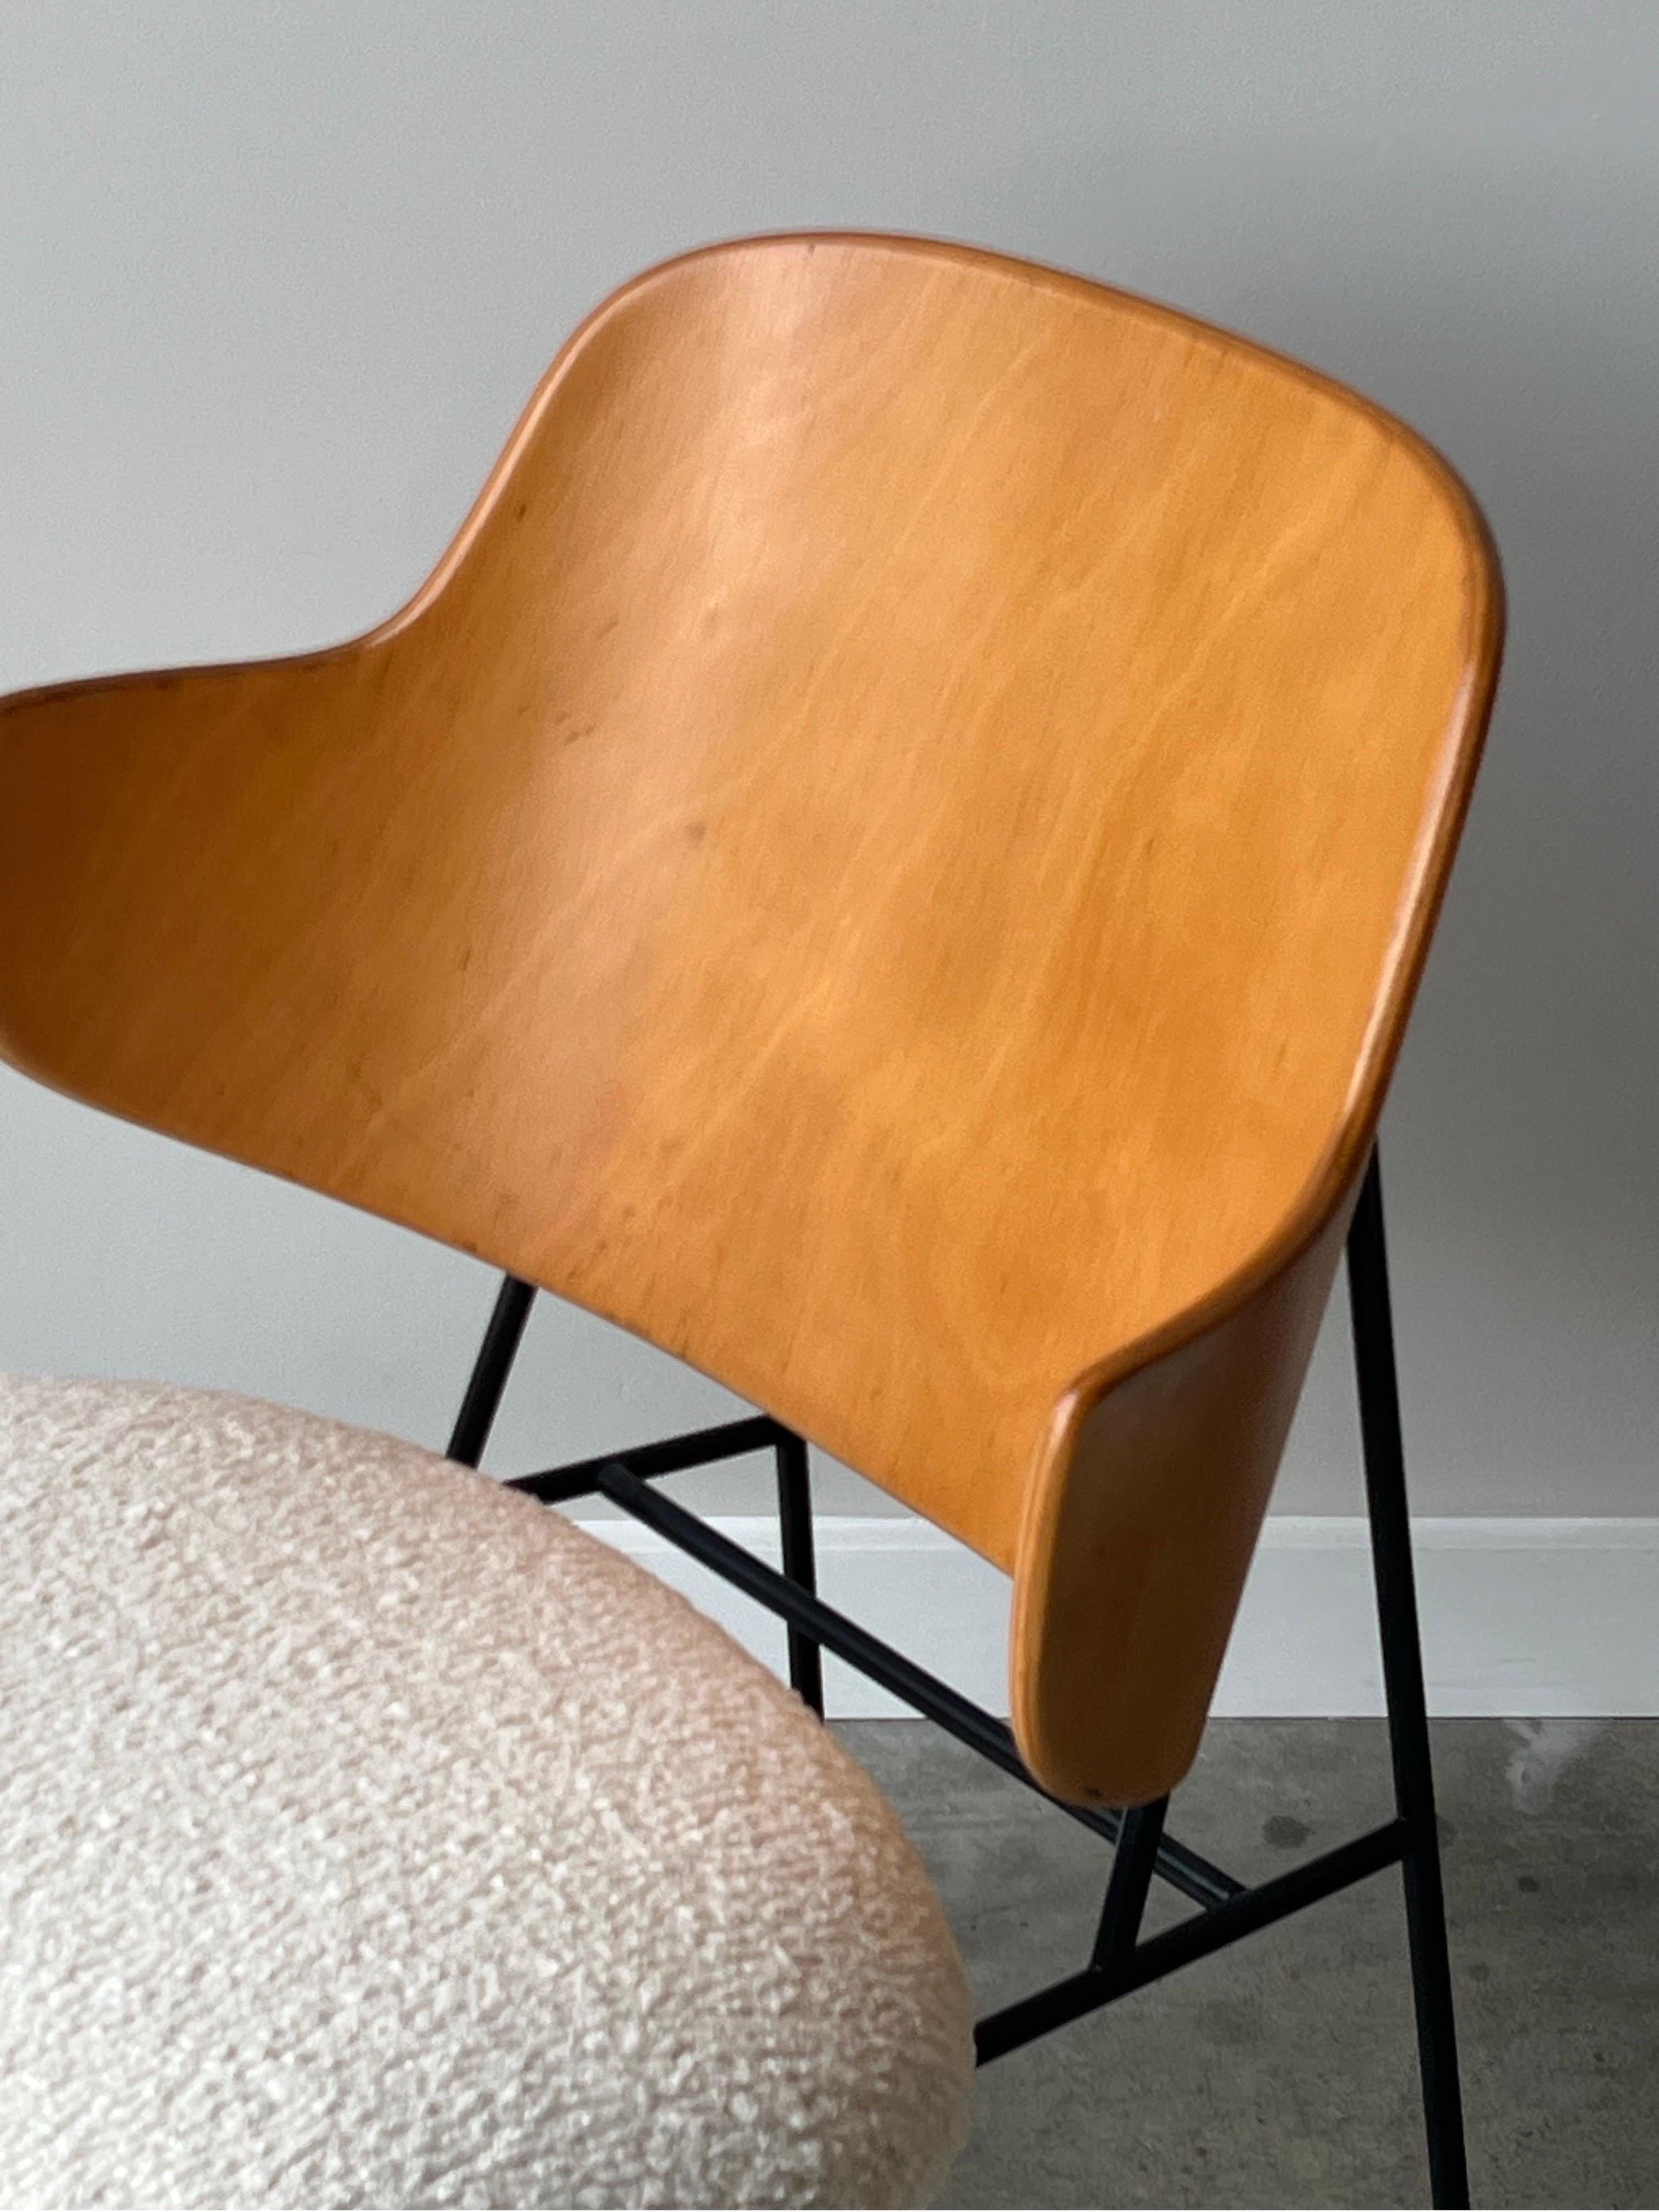 Mid-Century Kofod Larsen Penguin Chairs - a Pair For Sale 2